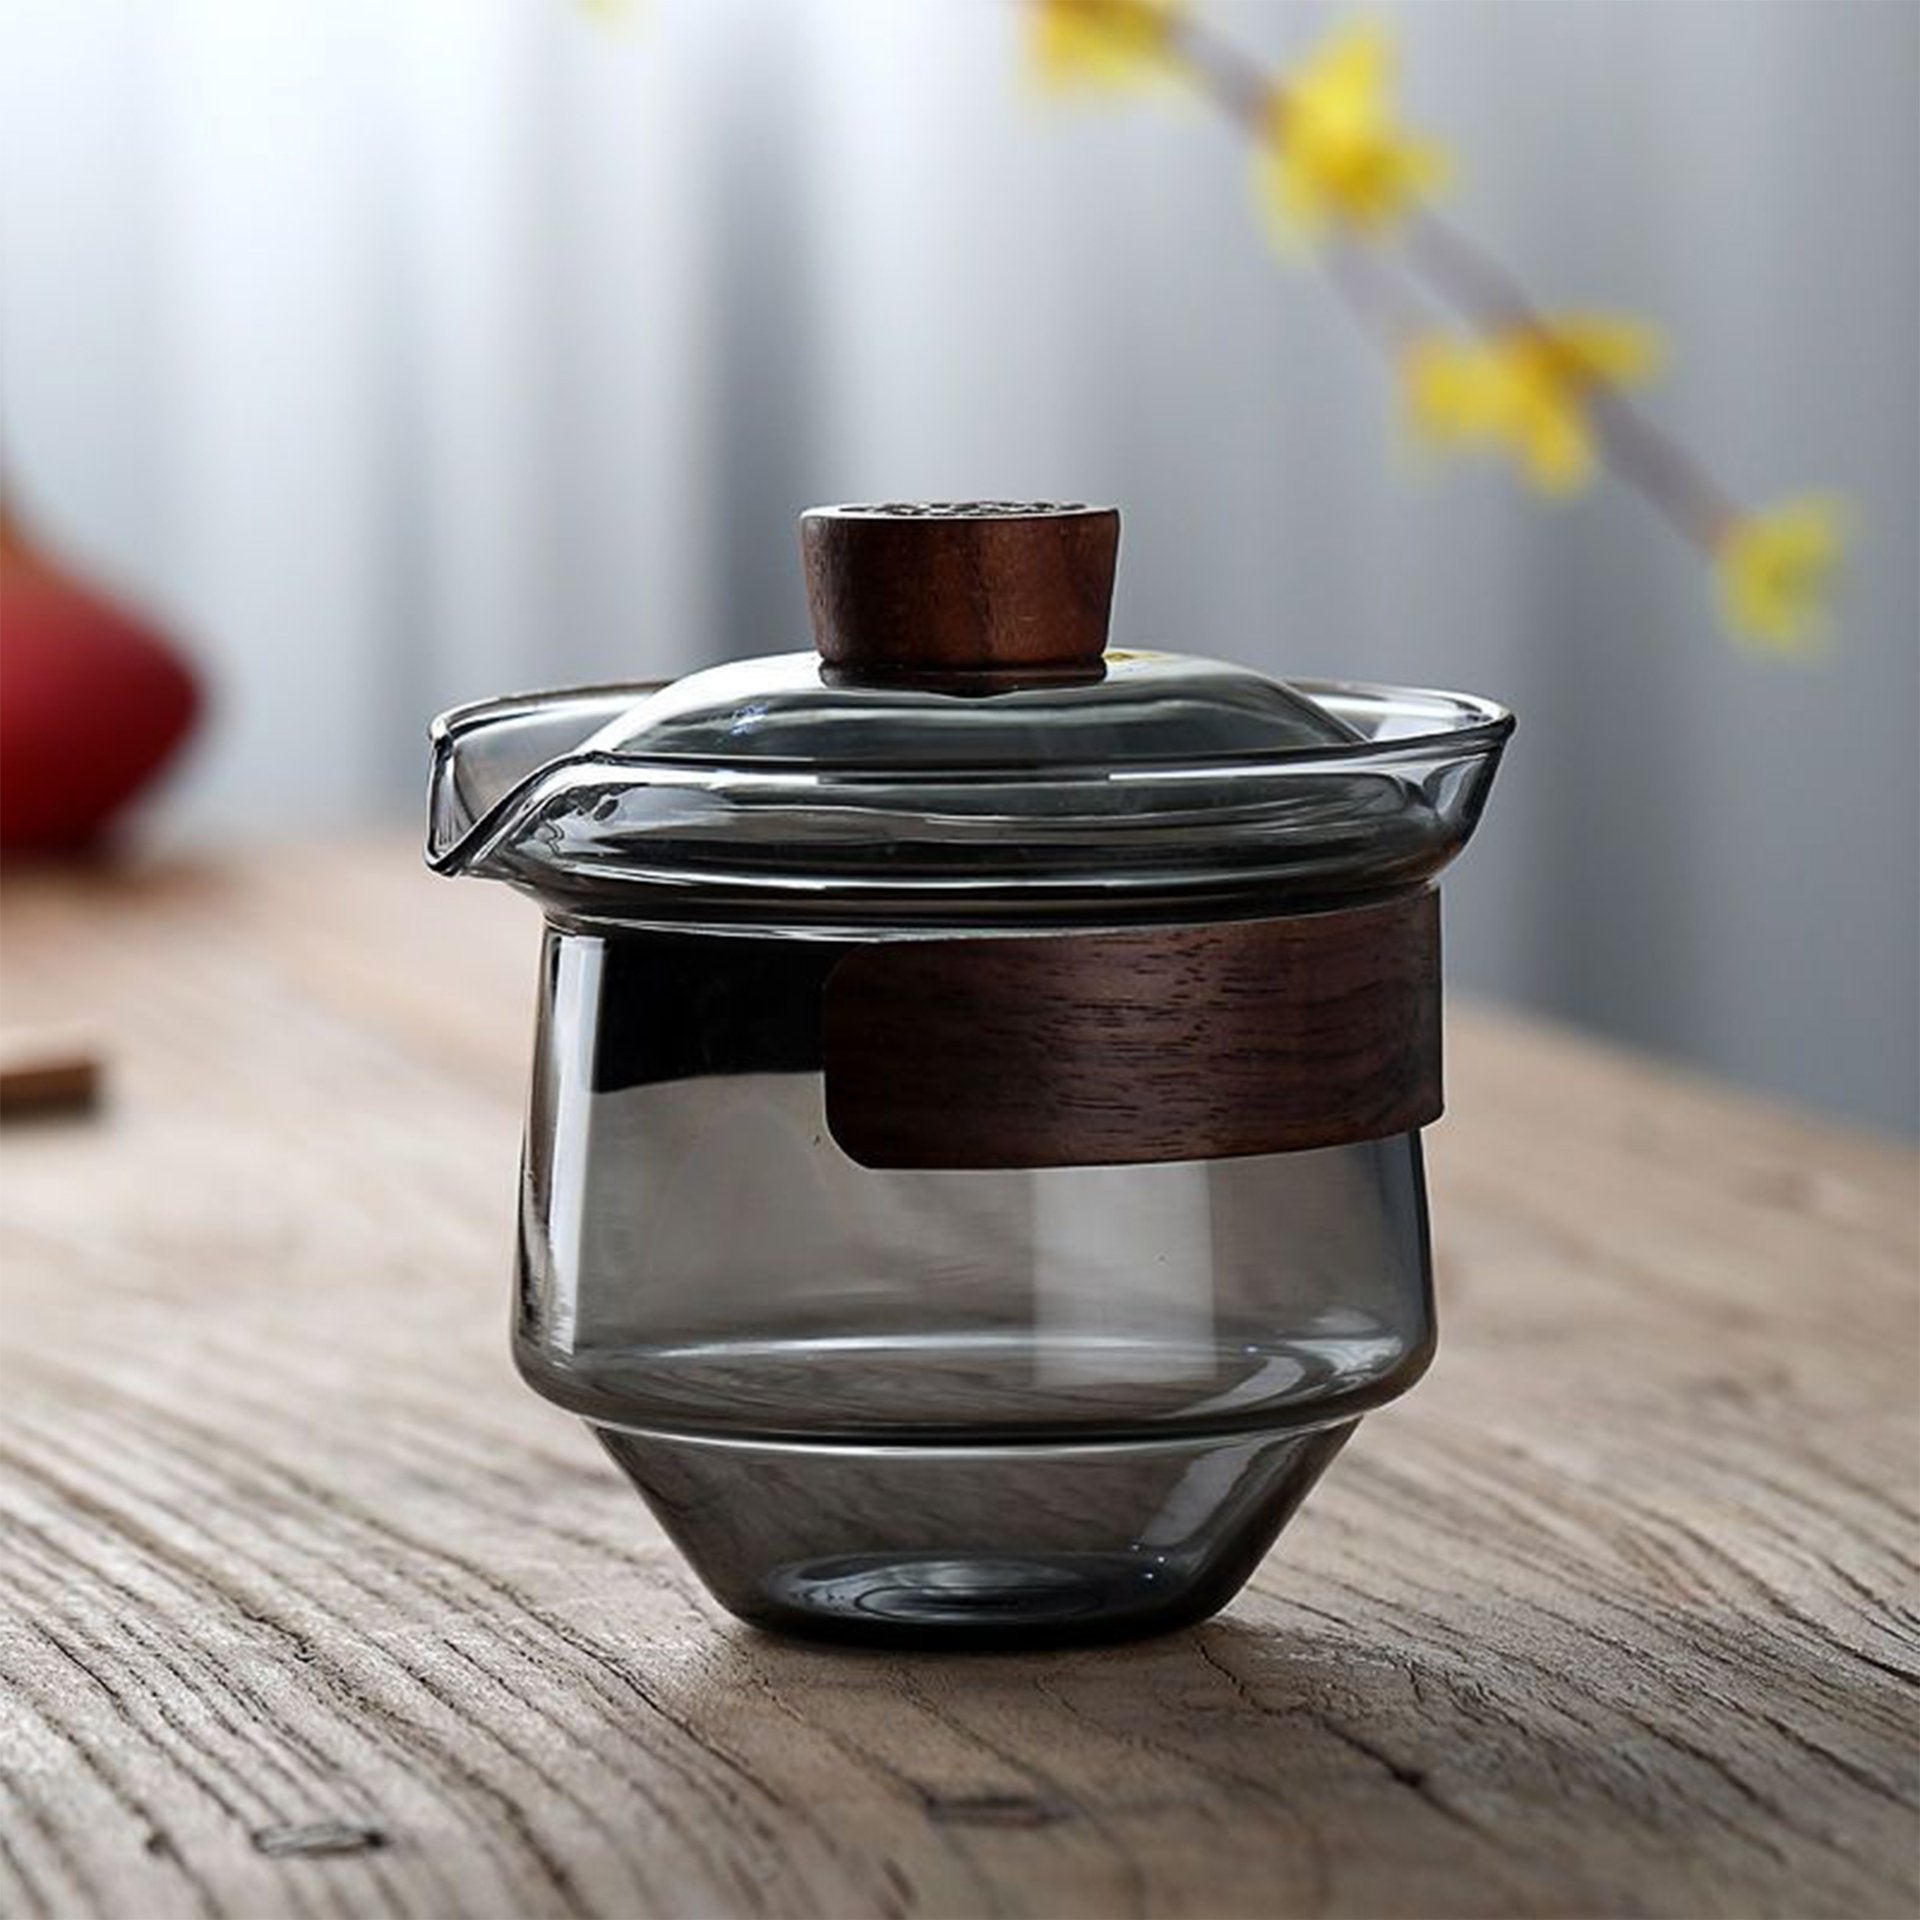 Elegant glass teapot with wooden accents placed on a wooden surface with soft lighting